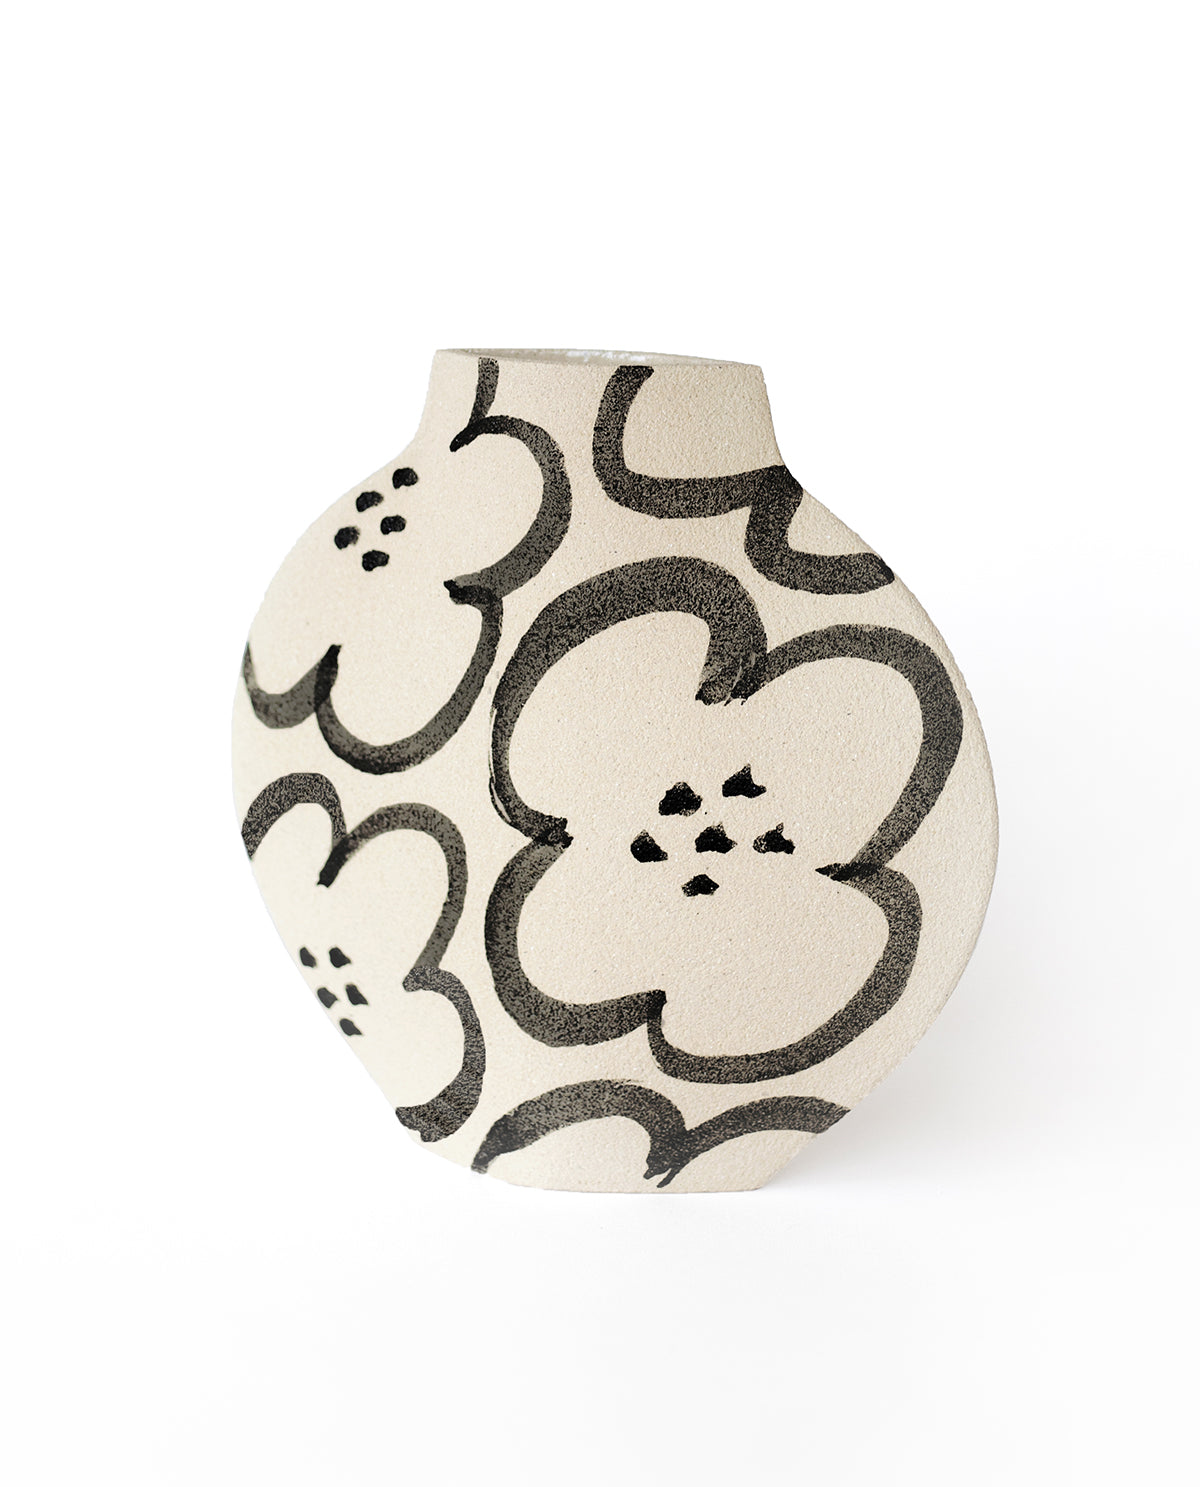 Hand-painted floral vase by INI CERAMIQUE with camellia patterns and a textured finish